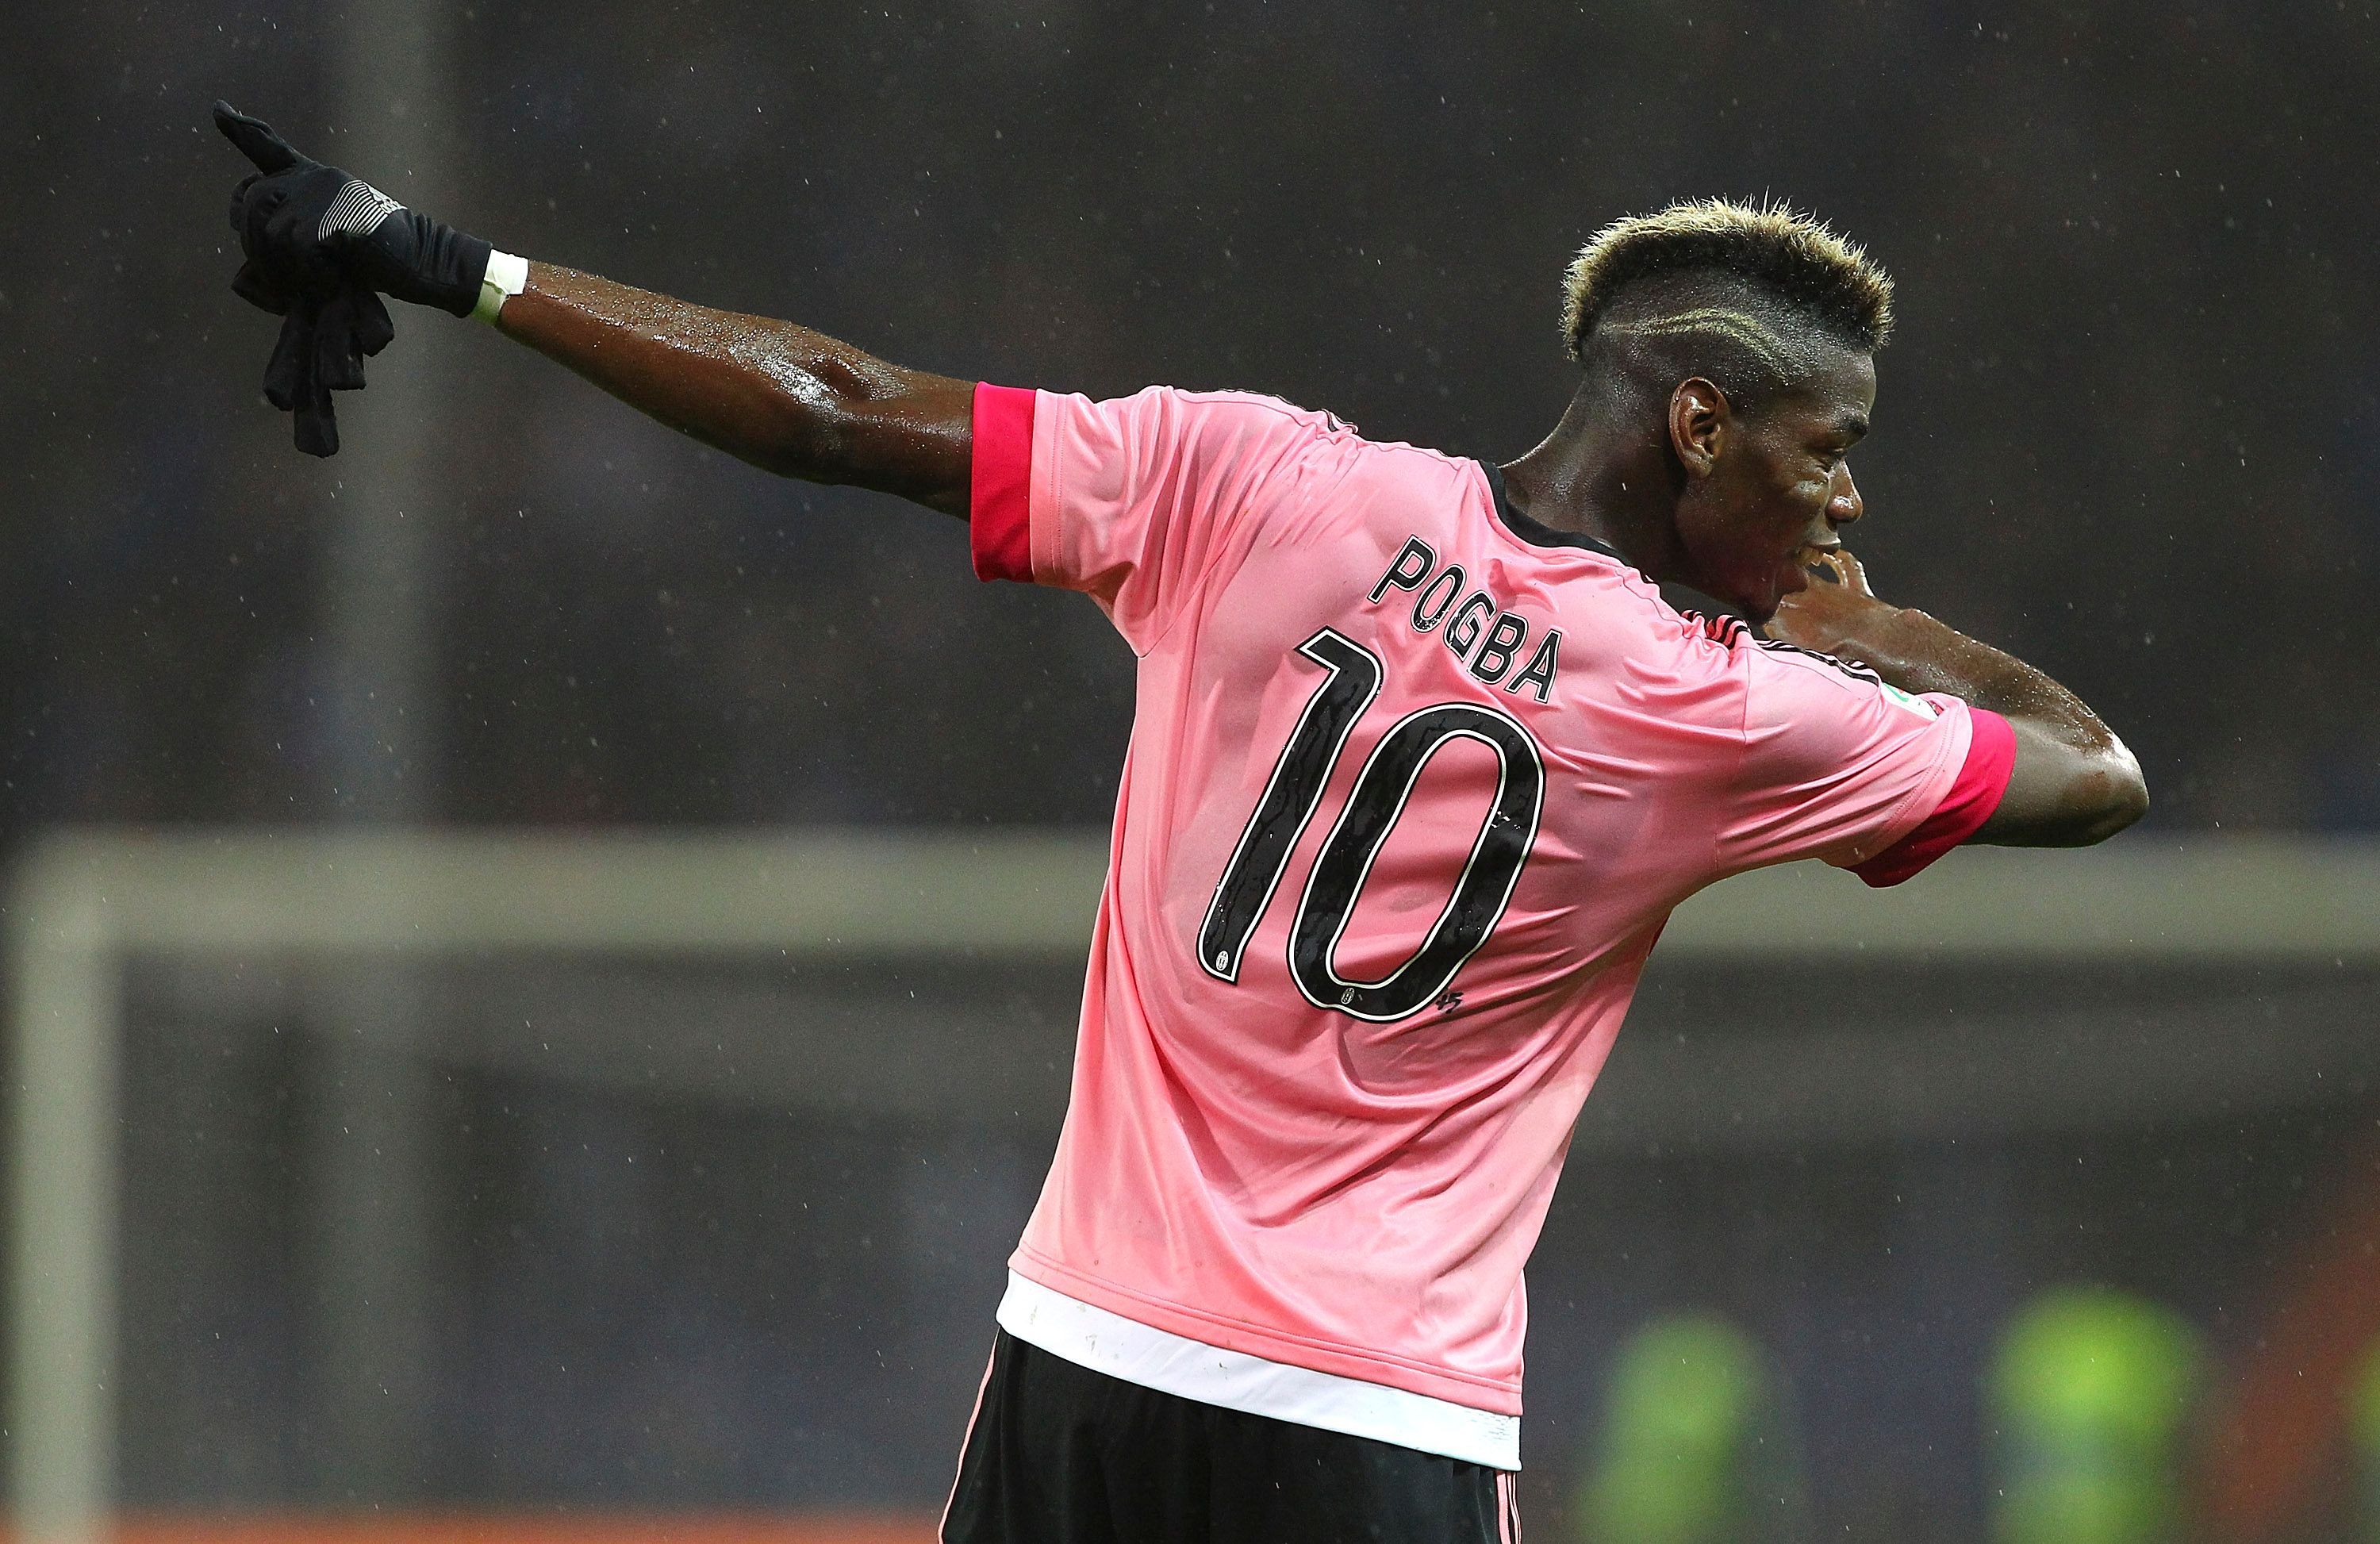 GENOA, ITALY - JANUARY 10: Paul Pogba of Juventus FC celebrates a victory at the end of the Serie A match between UC Sampdoria and Juventus FC at Stadio Luigi Ferraris on January 10, 2016 in Genoa, Italy. (Photo by Marco Luzzani/Getty Images)